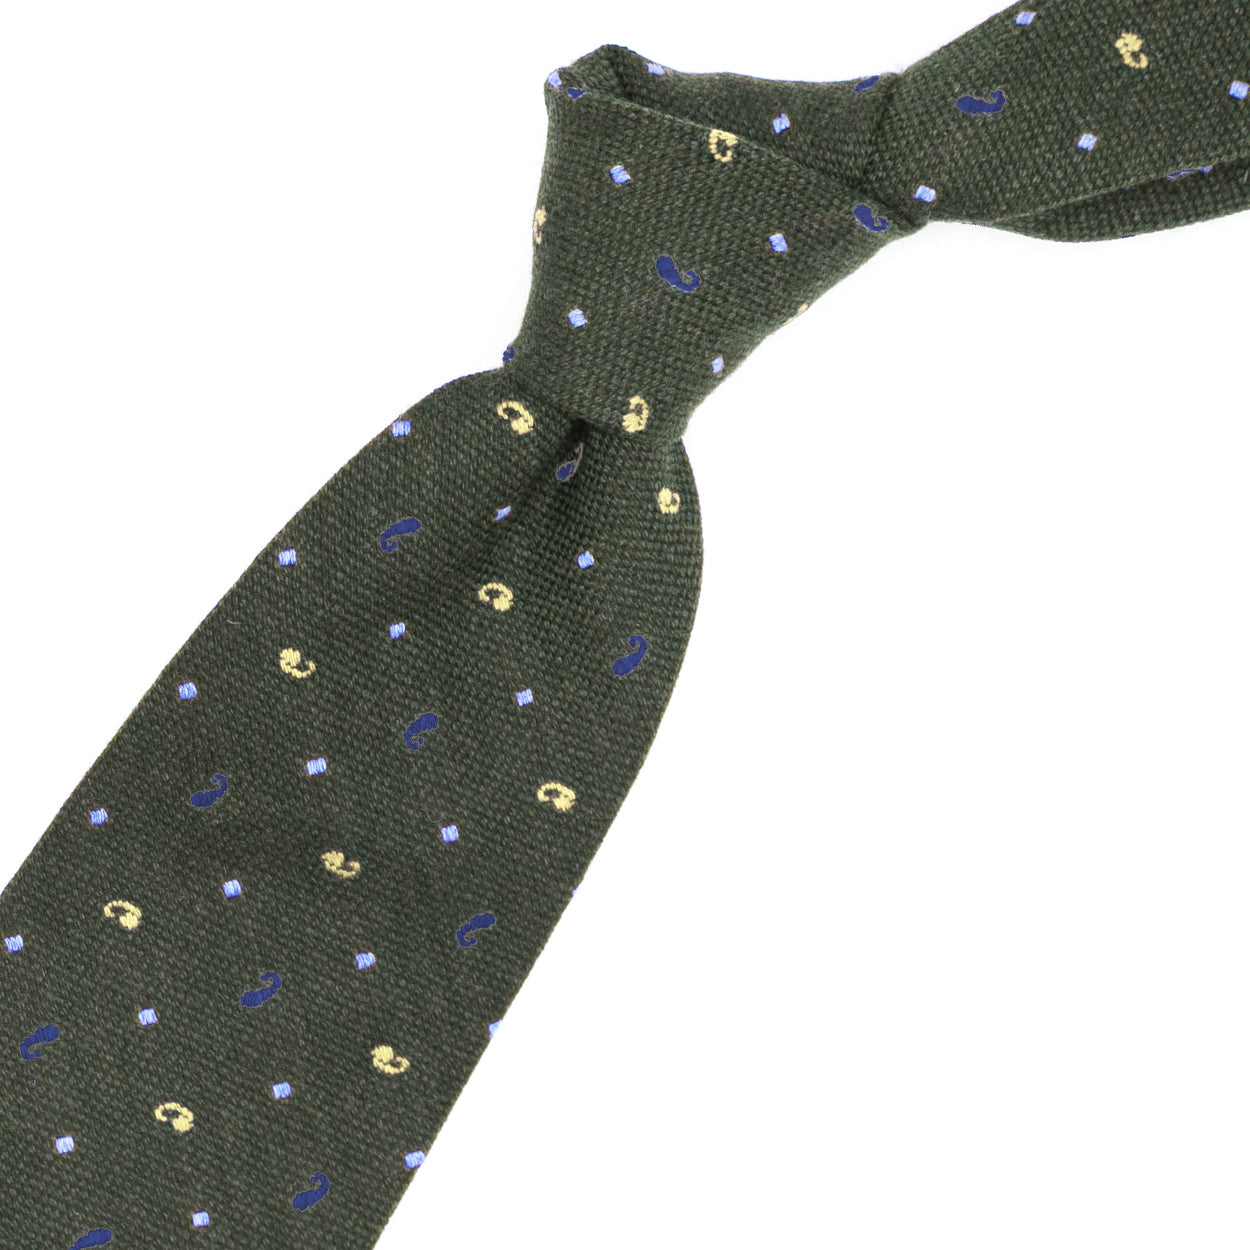 Moss green tie with yellow and purple paisleys and blue squares